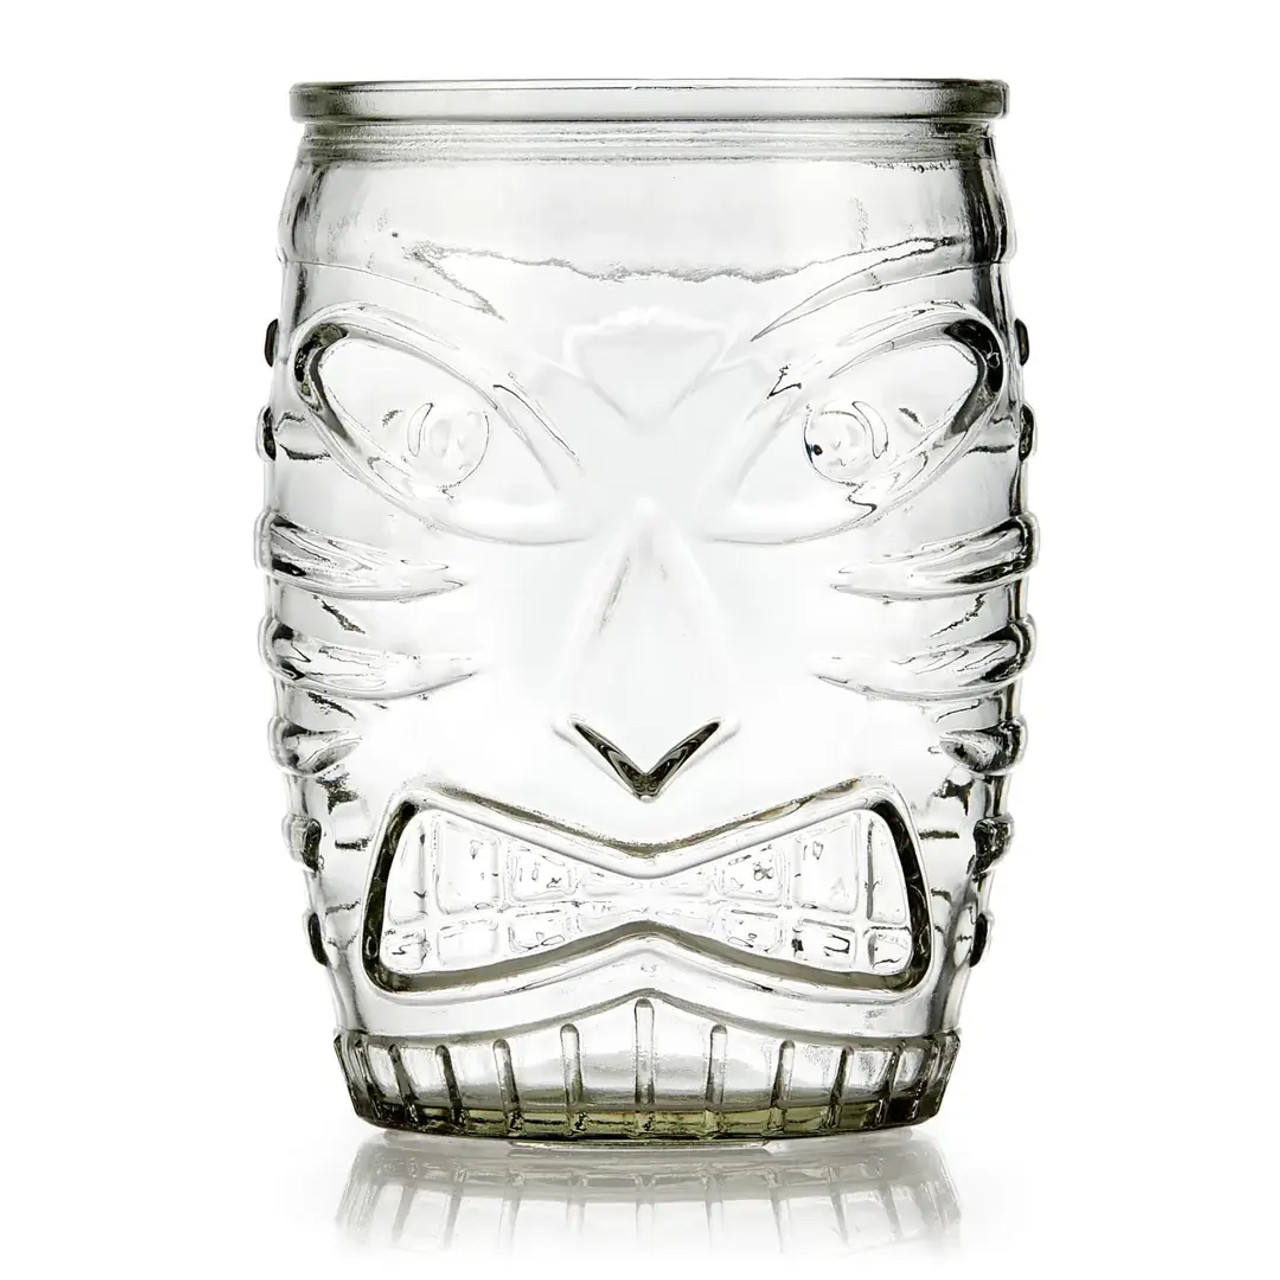 Libbey 16 oz. Tiki Glass - Buy 12/Case at Best Price | Trendy Tropical Glassware- Chicken Pieces